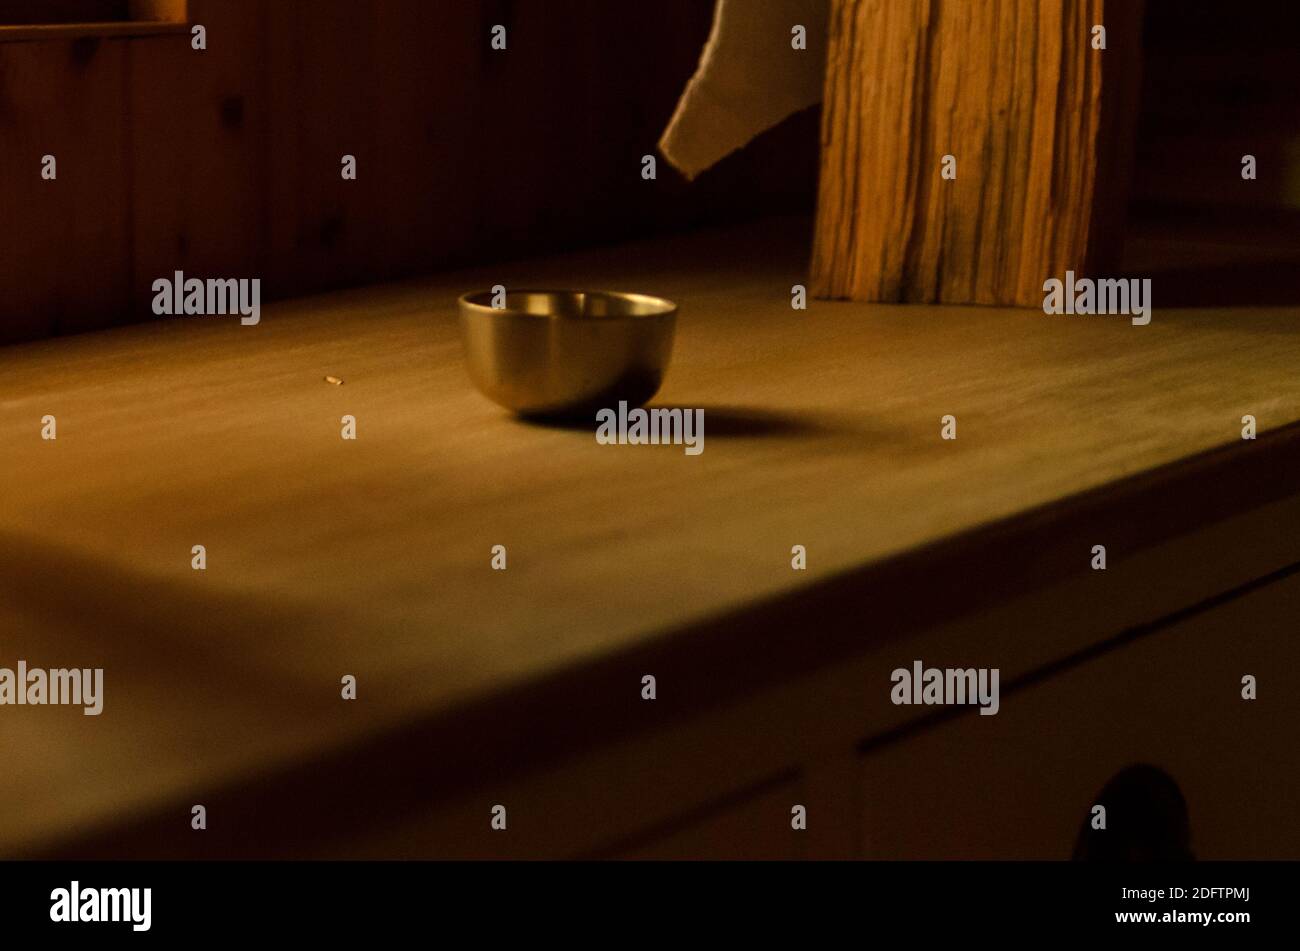 Golden brass singing bowl on a wooden table in dramatic light Stock Photo